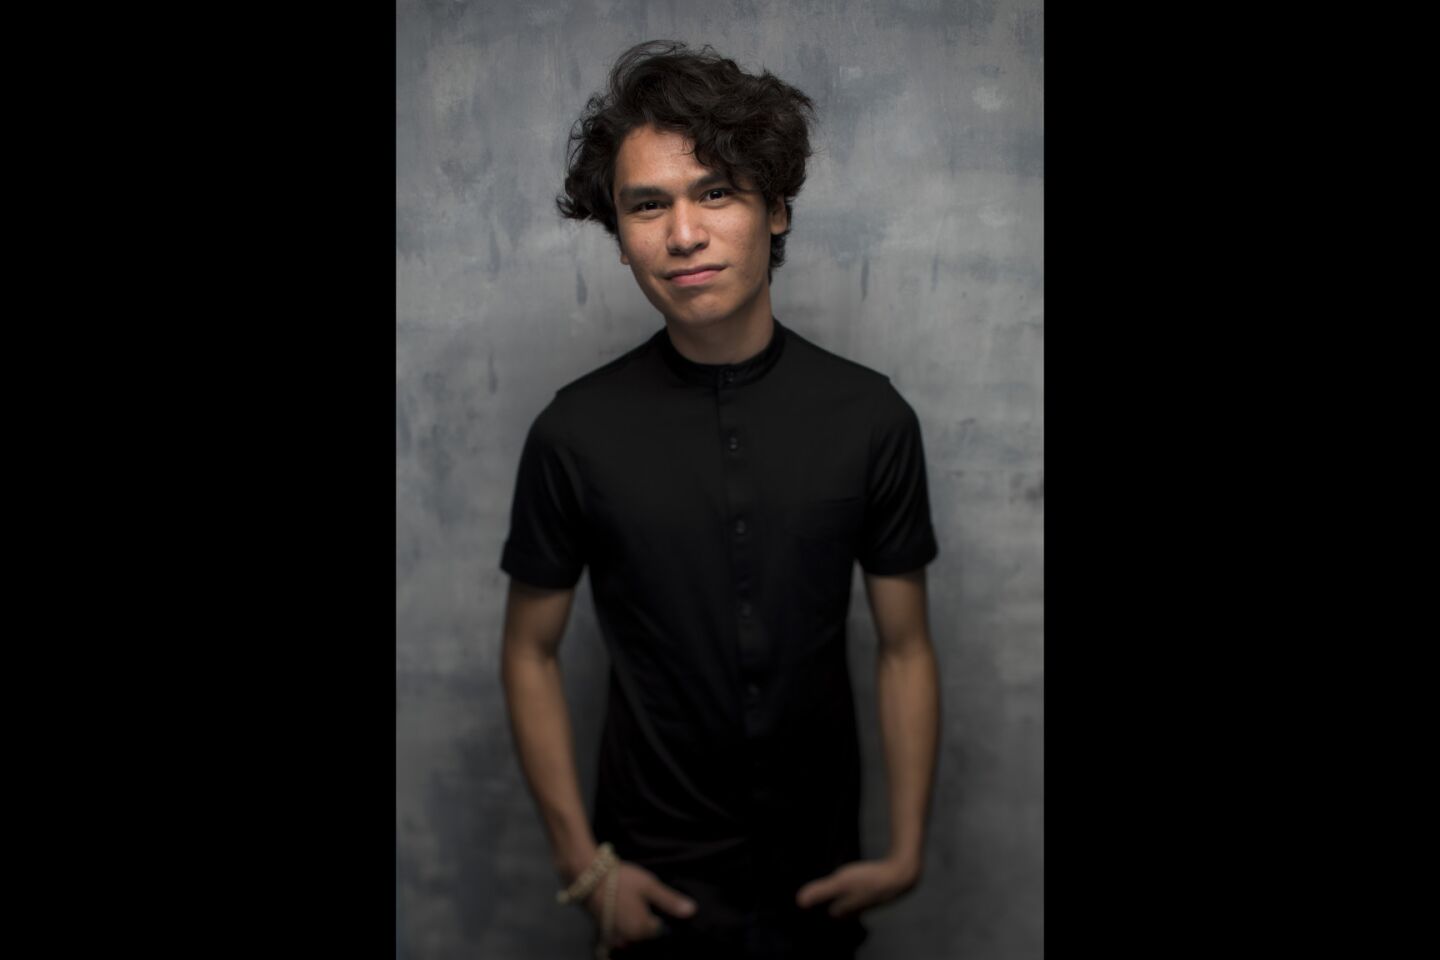 Actor Forrest Goodluck, from the film "The Miseducation of Cameron Post," photographed in the L.A. Times Studio at Chase Sapphire on Main, during the Sundance Film Festival in Park City, Utah, Jan. 21, 2018.